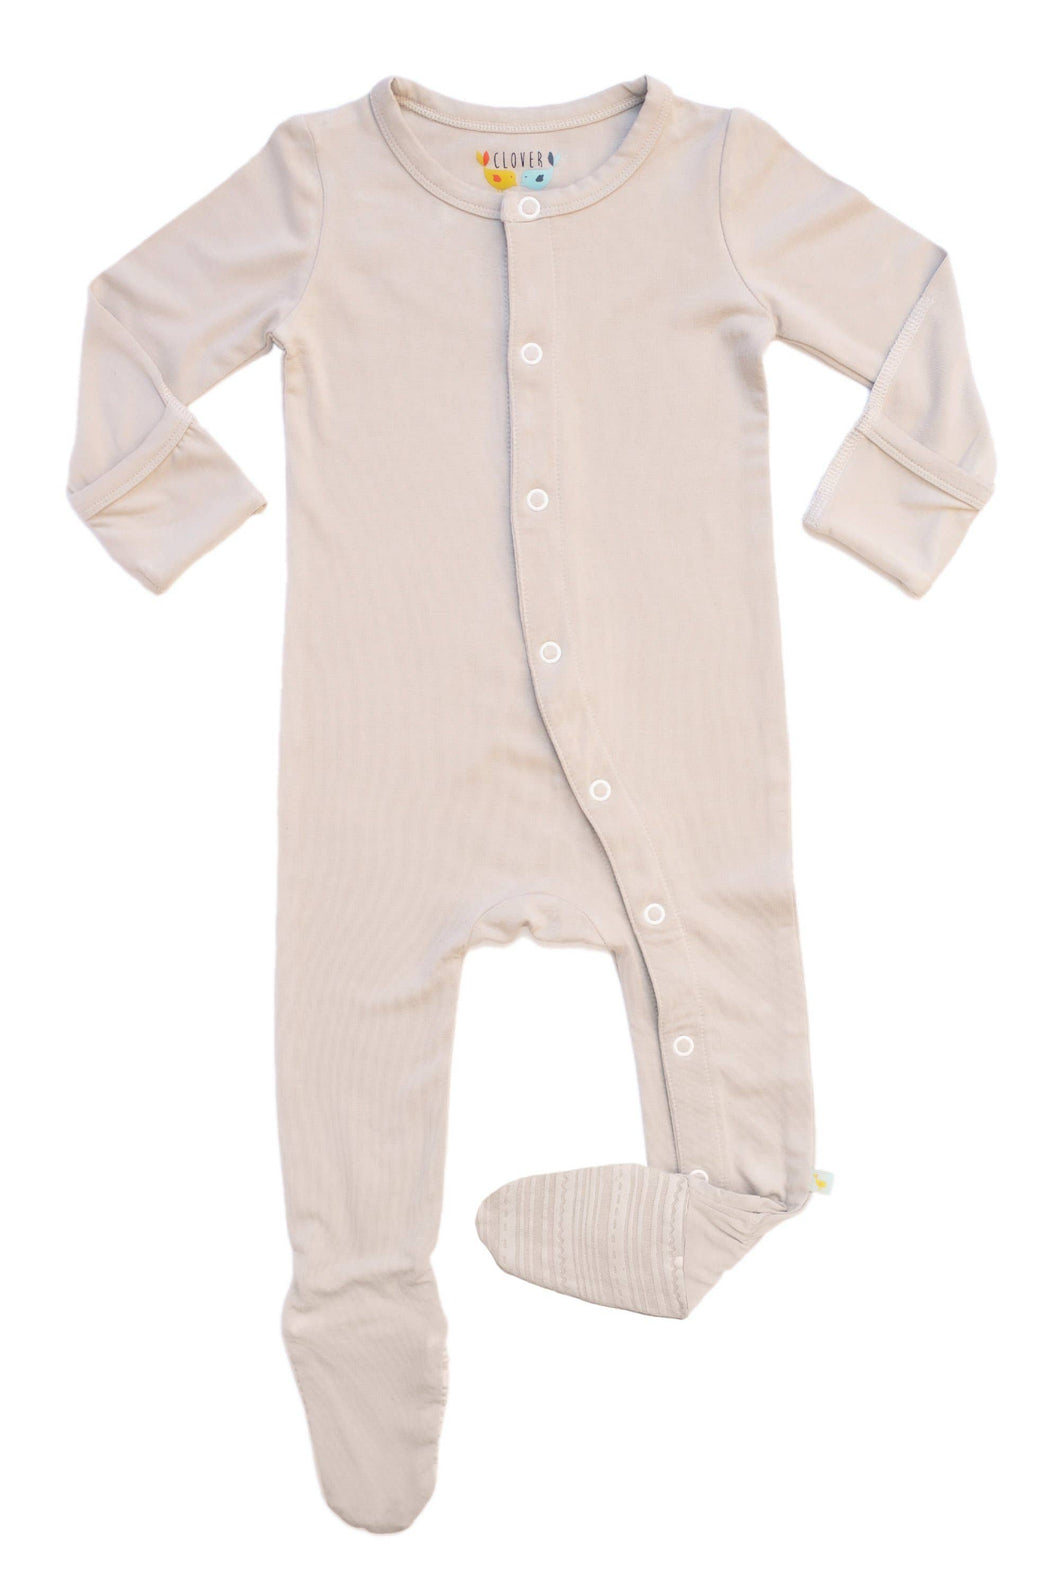 Solid Baby One Piece Footie Coveralls